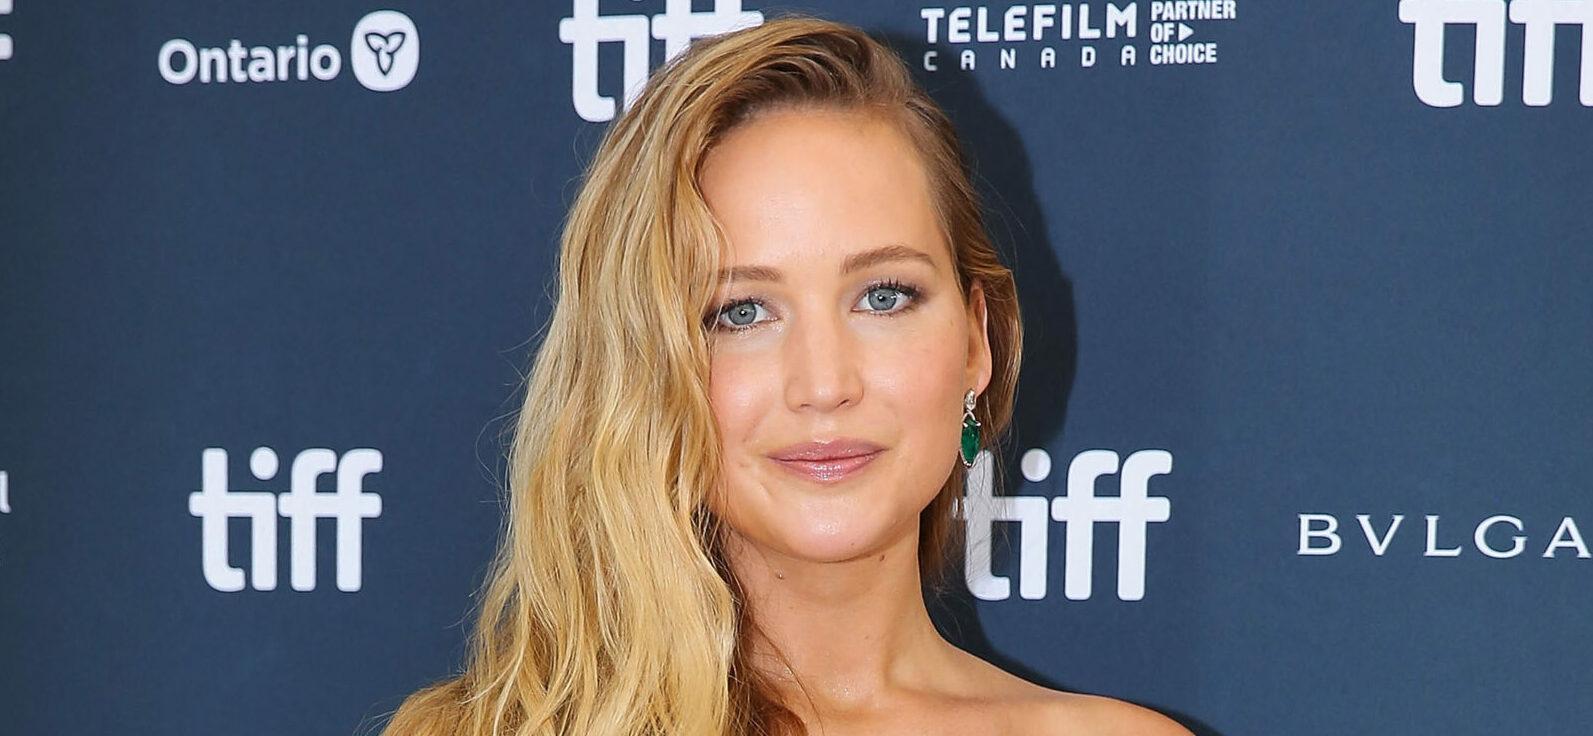 Jennifer Lawrence Would Be ‘Starstruck’ If She Ever Met THIS Celebrity: ‘That Would Knock Me Over’